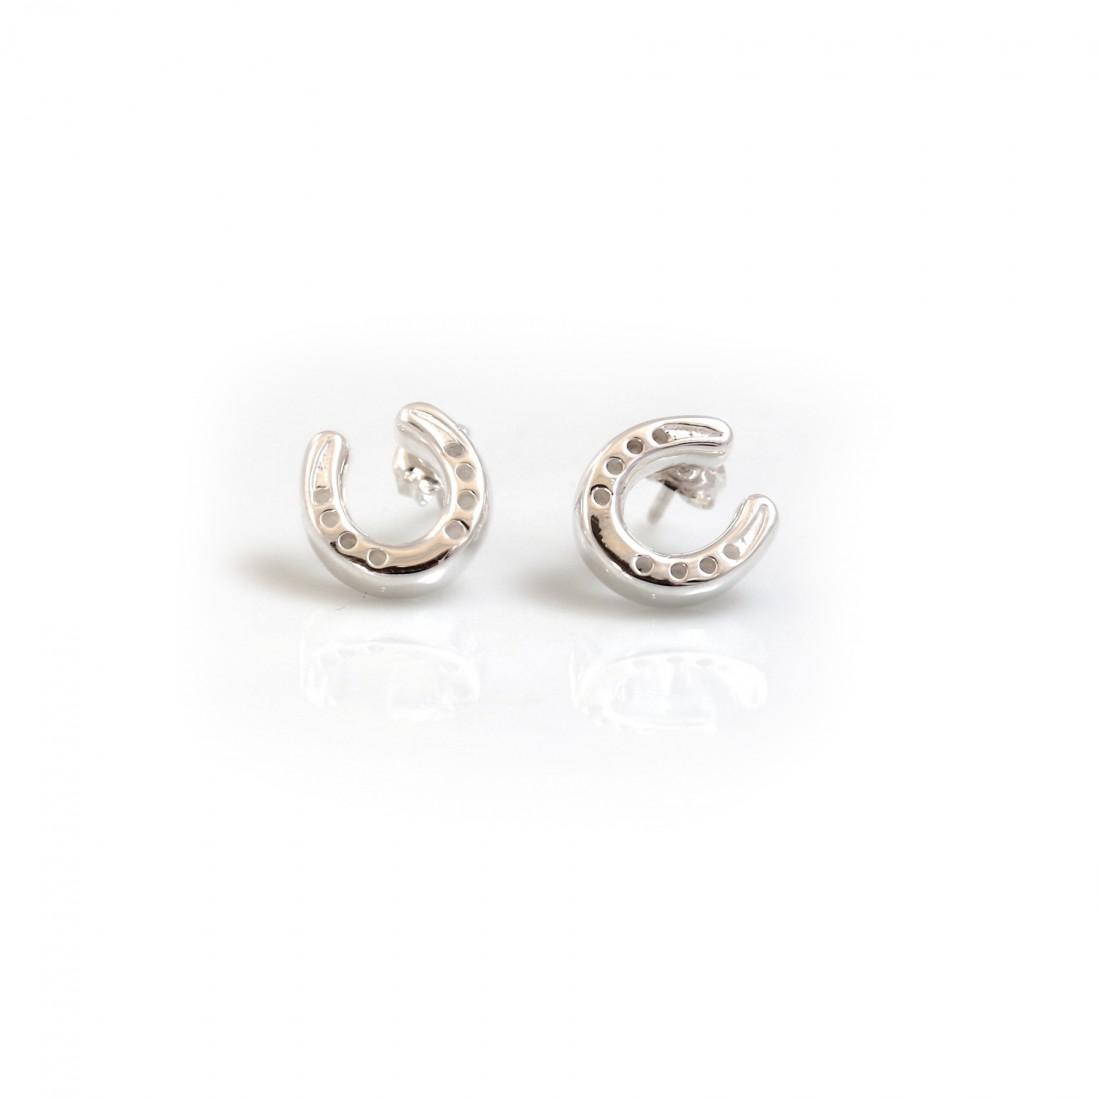 Hiho Silver Sterling Silver Horseshoe Studs